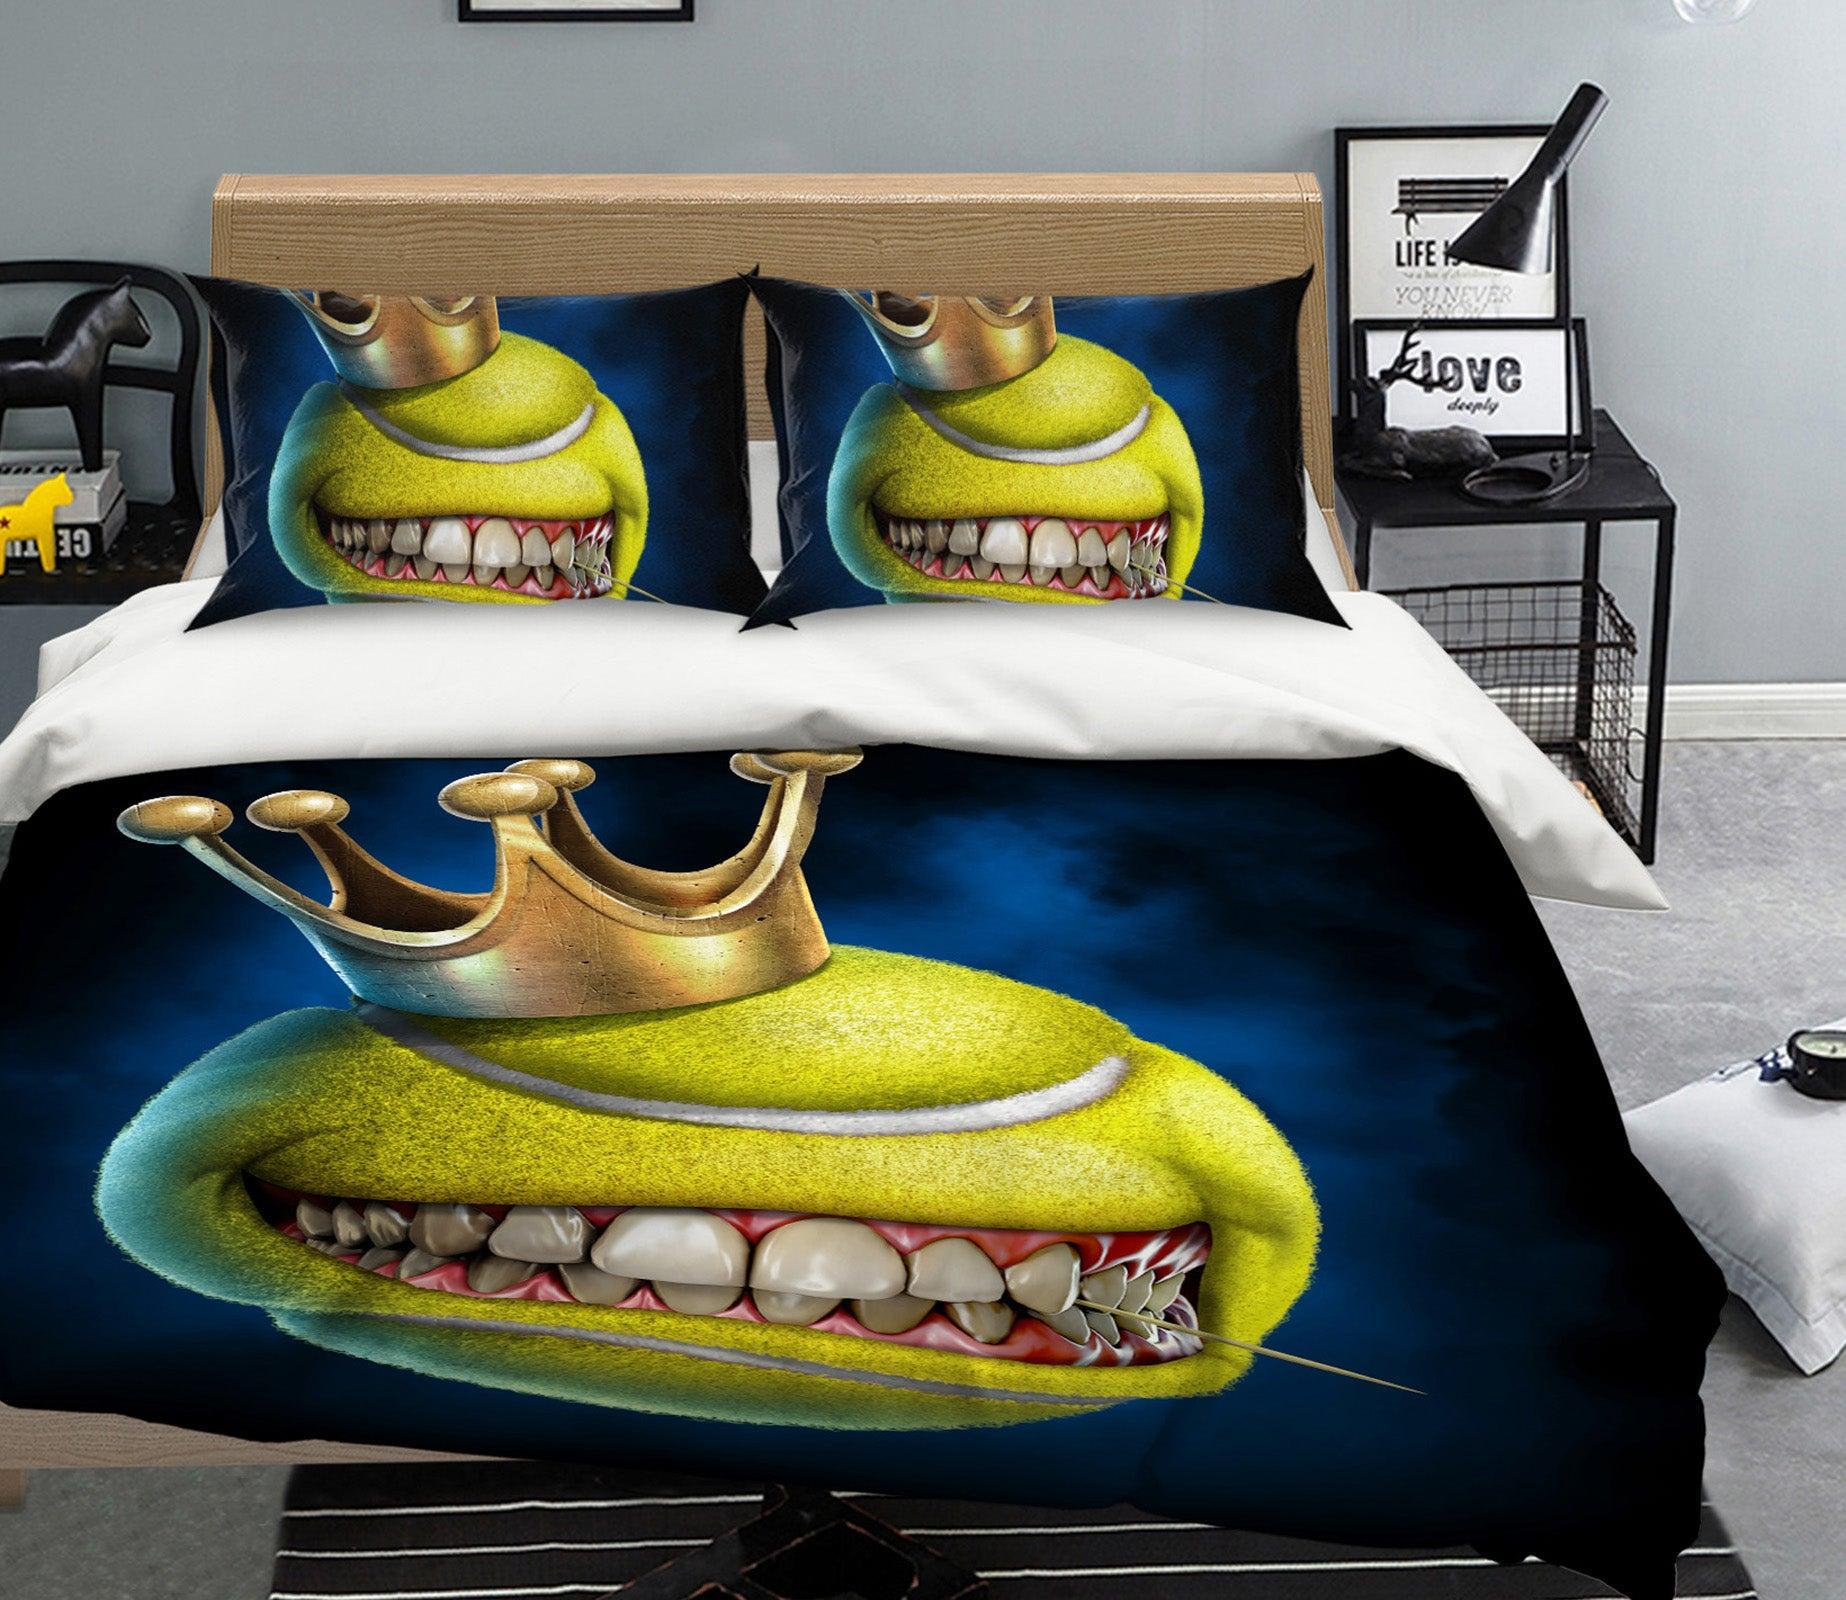 3D Tennis Tooth Crown 4054 Tom Wood Quilt Cover Set Bedding Set Pillowcases 3D Bed Pillowcases Quilt Duvet cover